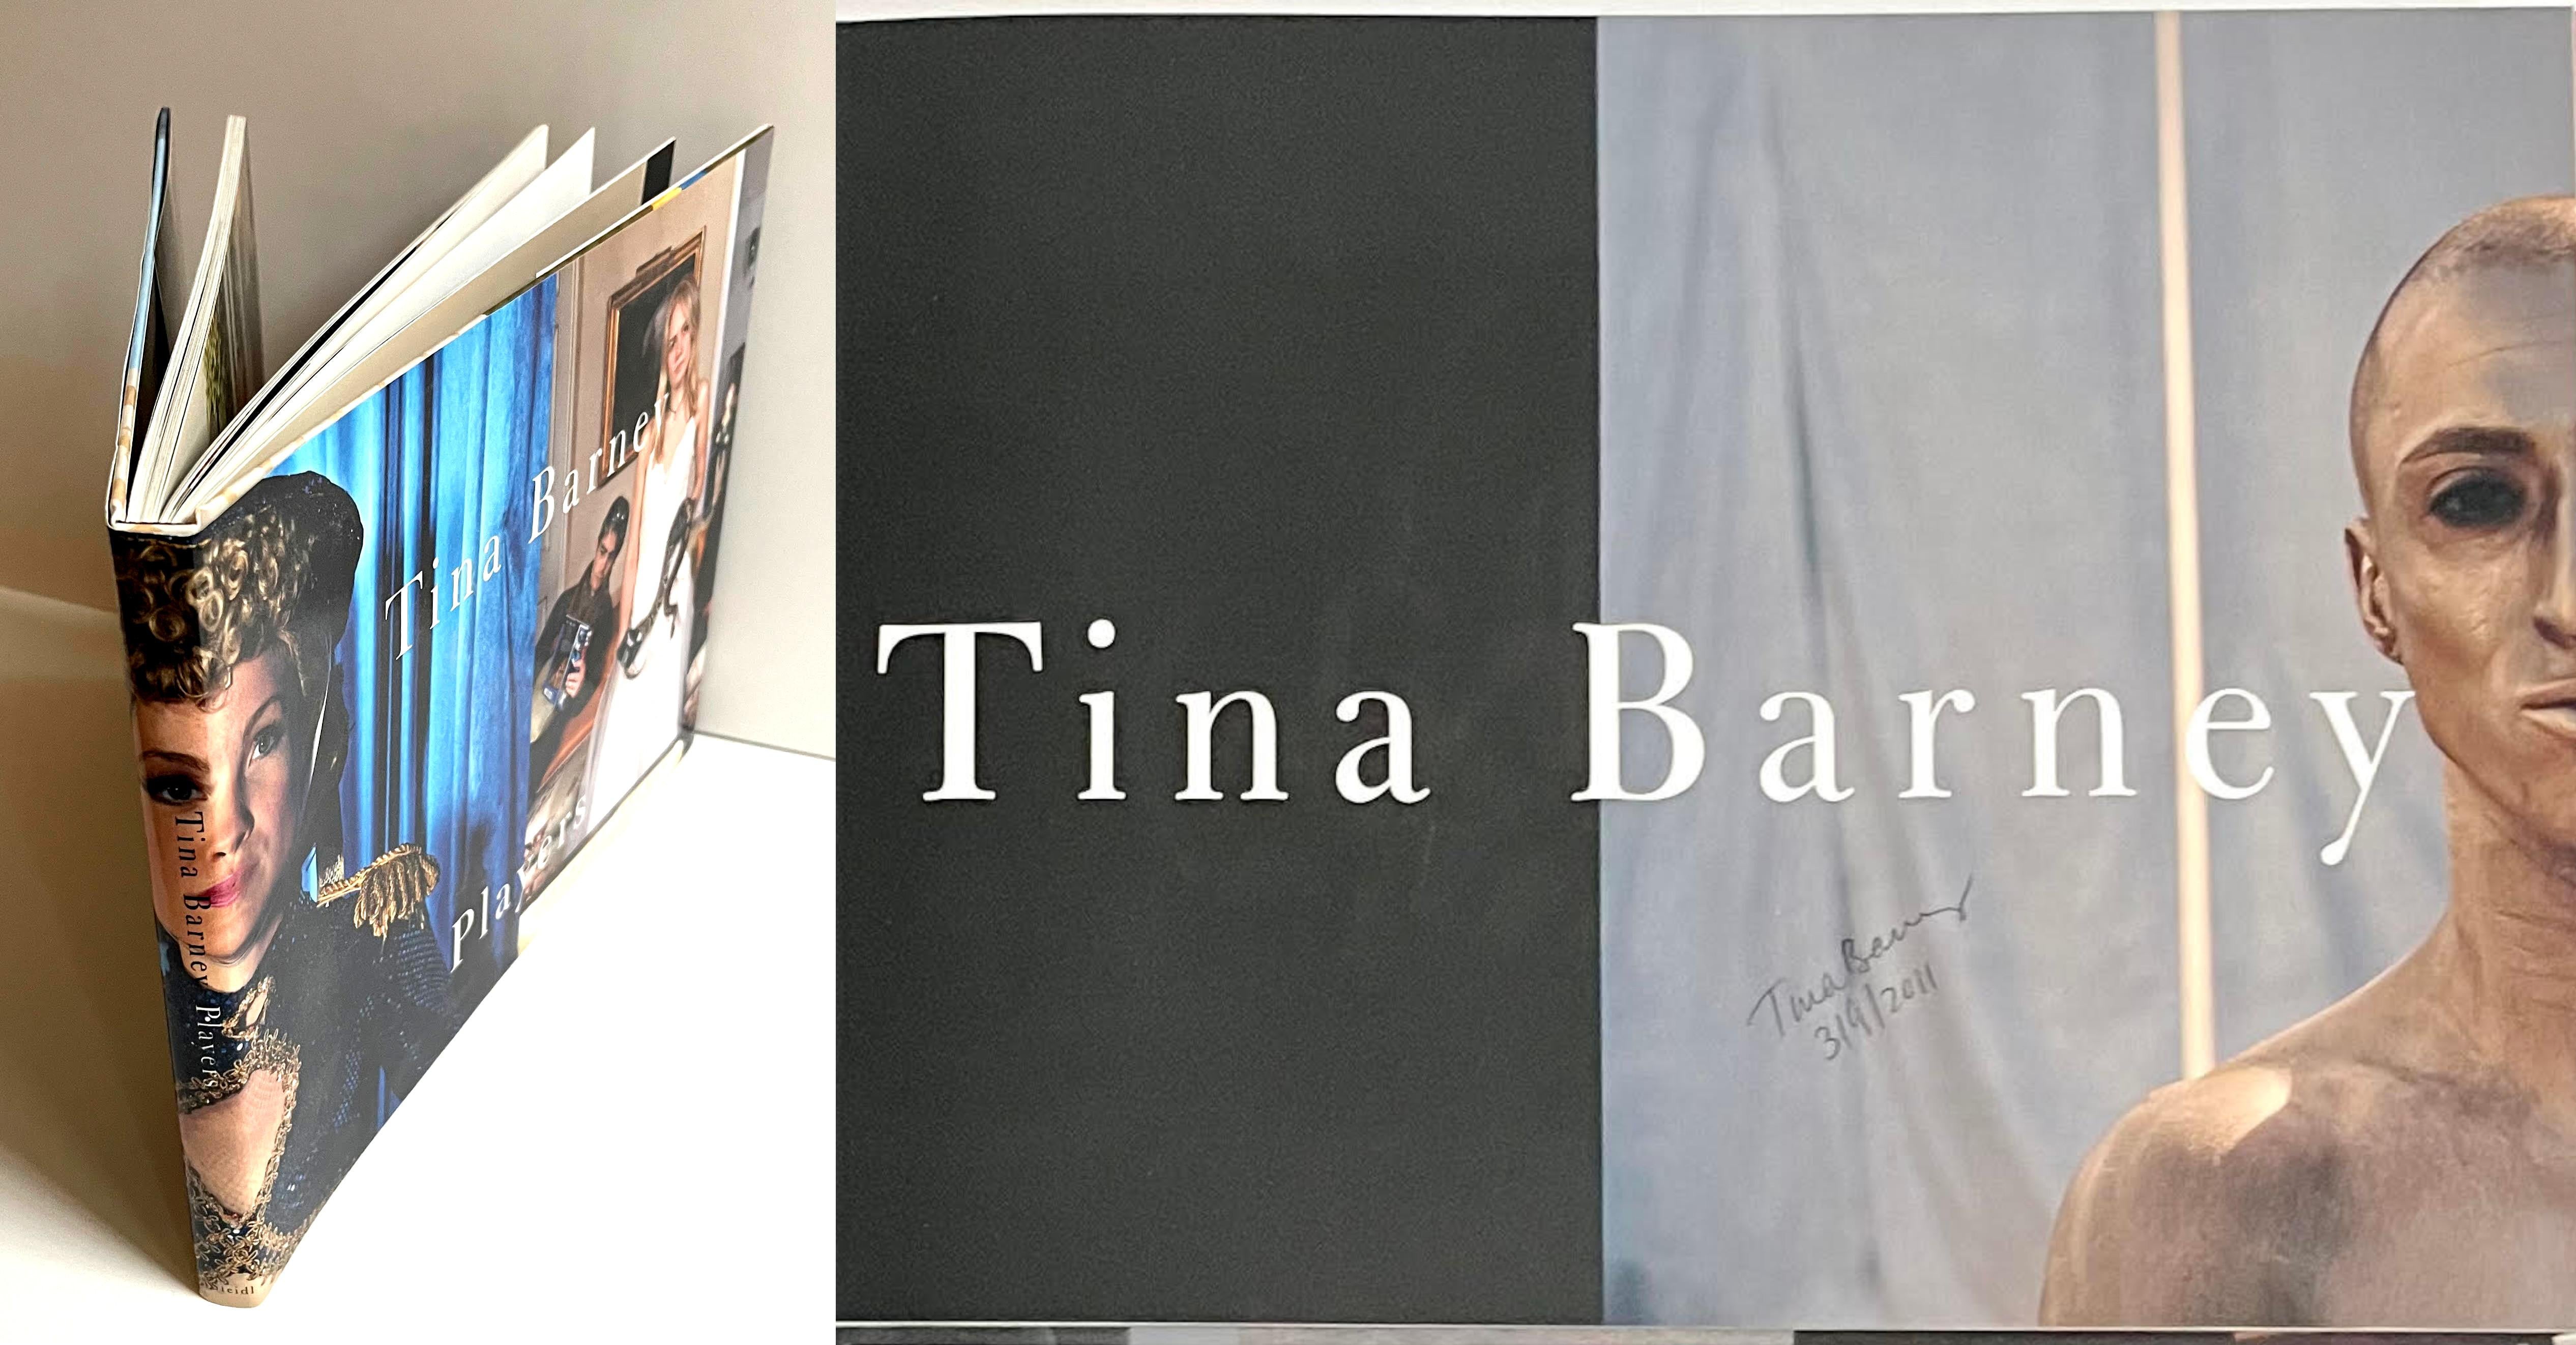 Players (Signed and dated by Tina Barney) monograph by renowned photographer 